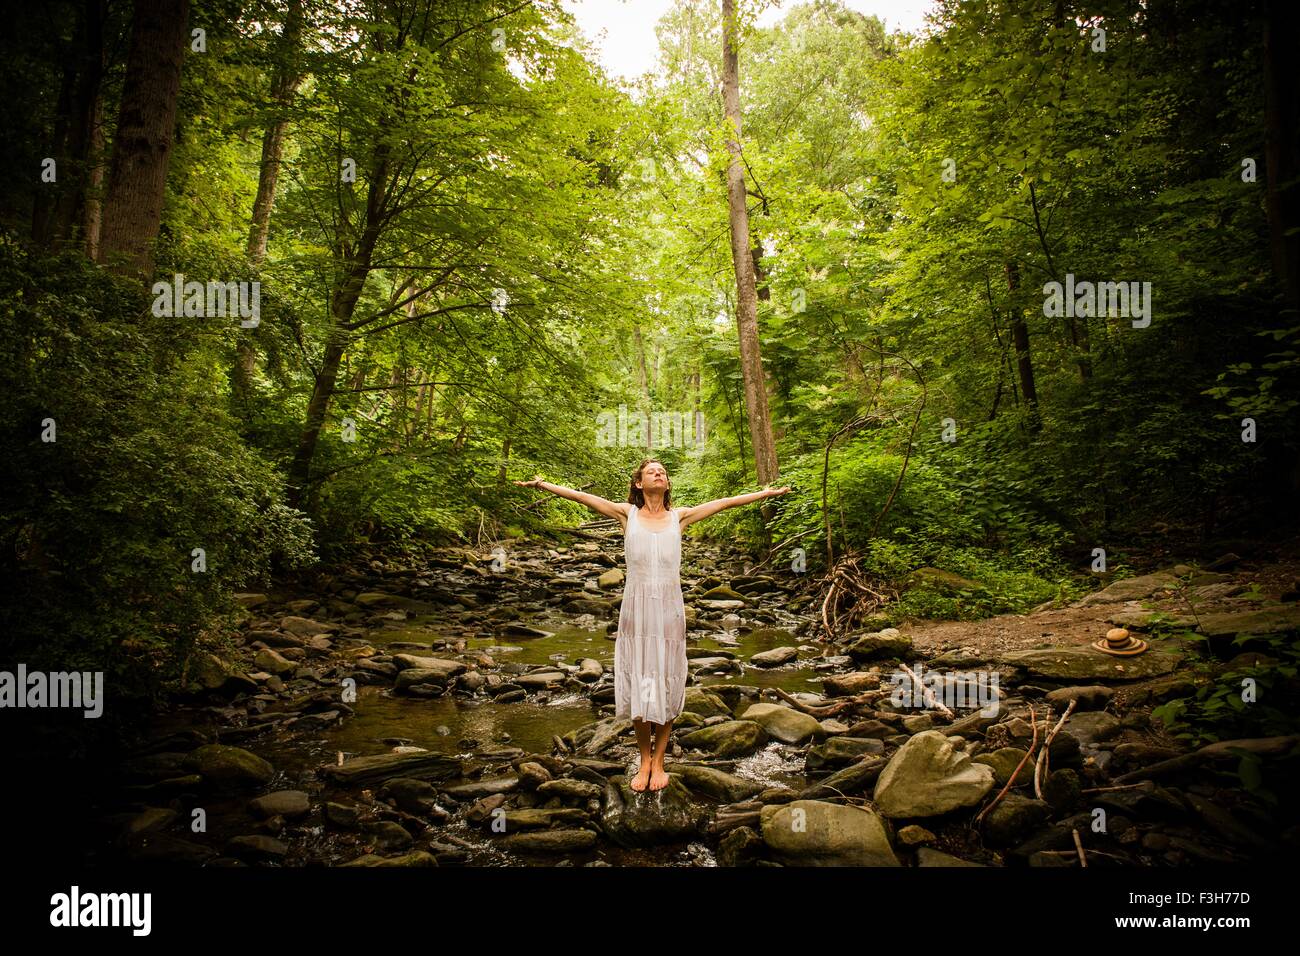 Mid adult woman standing barefoot on rocky riverbed wearing white dress, arms raised open looking up Stock Photo